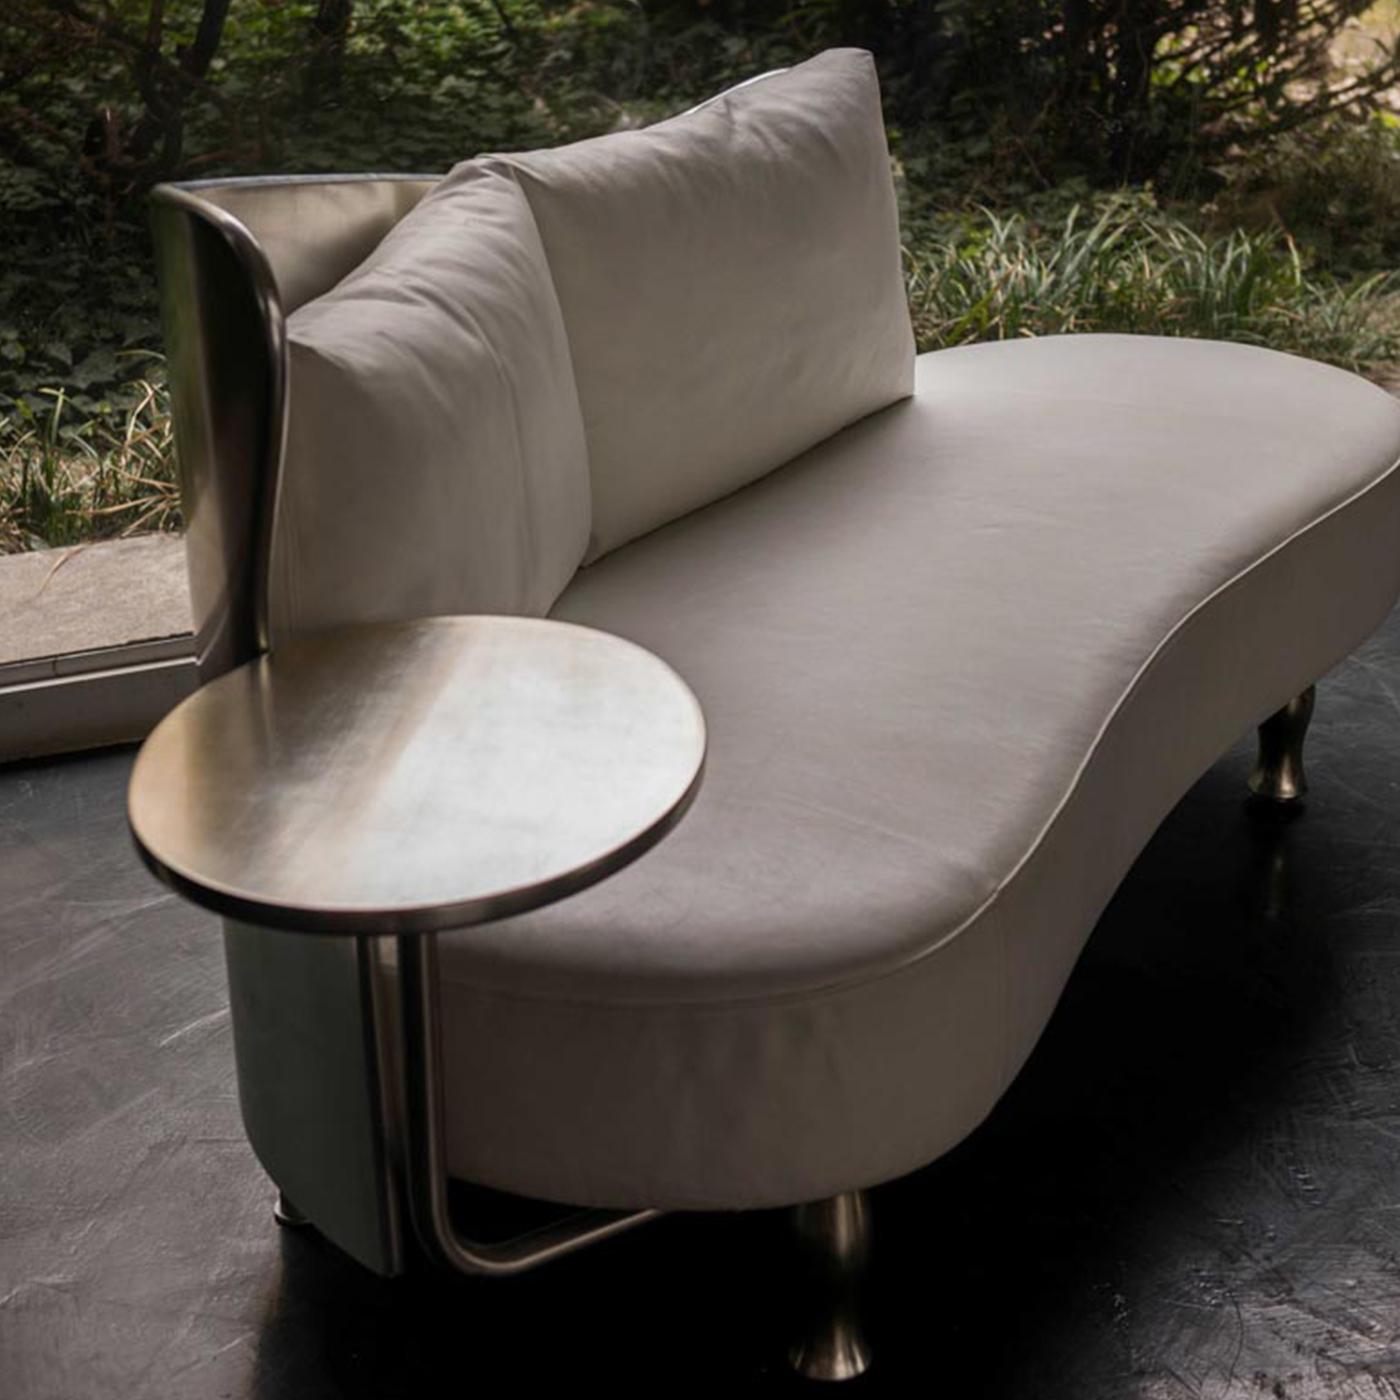 A unique sofa, equipped with a swivel table attached that can be moved. The back is made of curved laminated wood and coated with silver leaf (option also available in gold leaf). The seat rests instead on a padded steel structure, is covered in